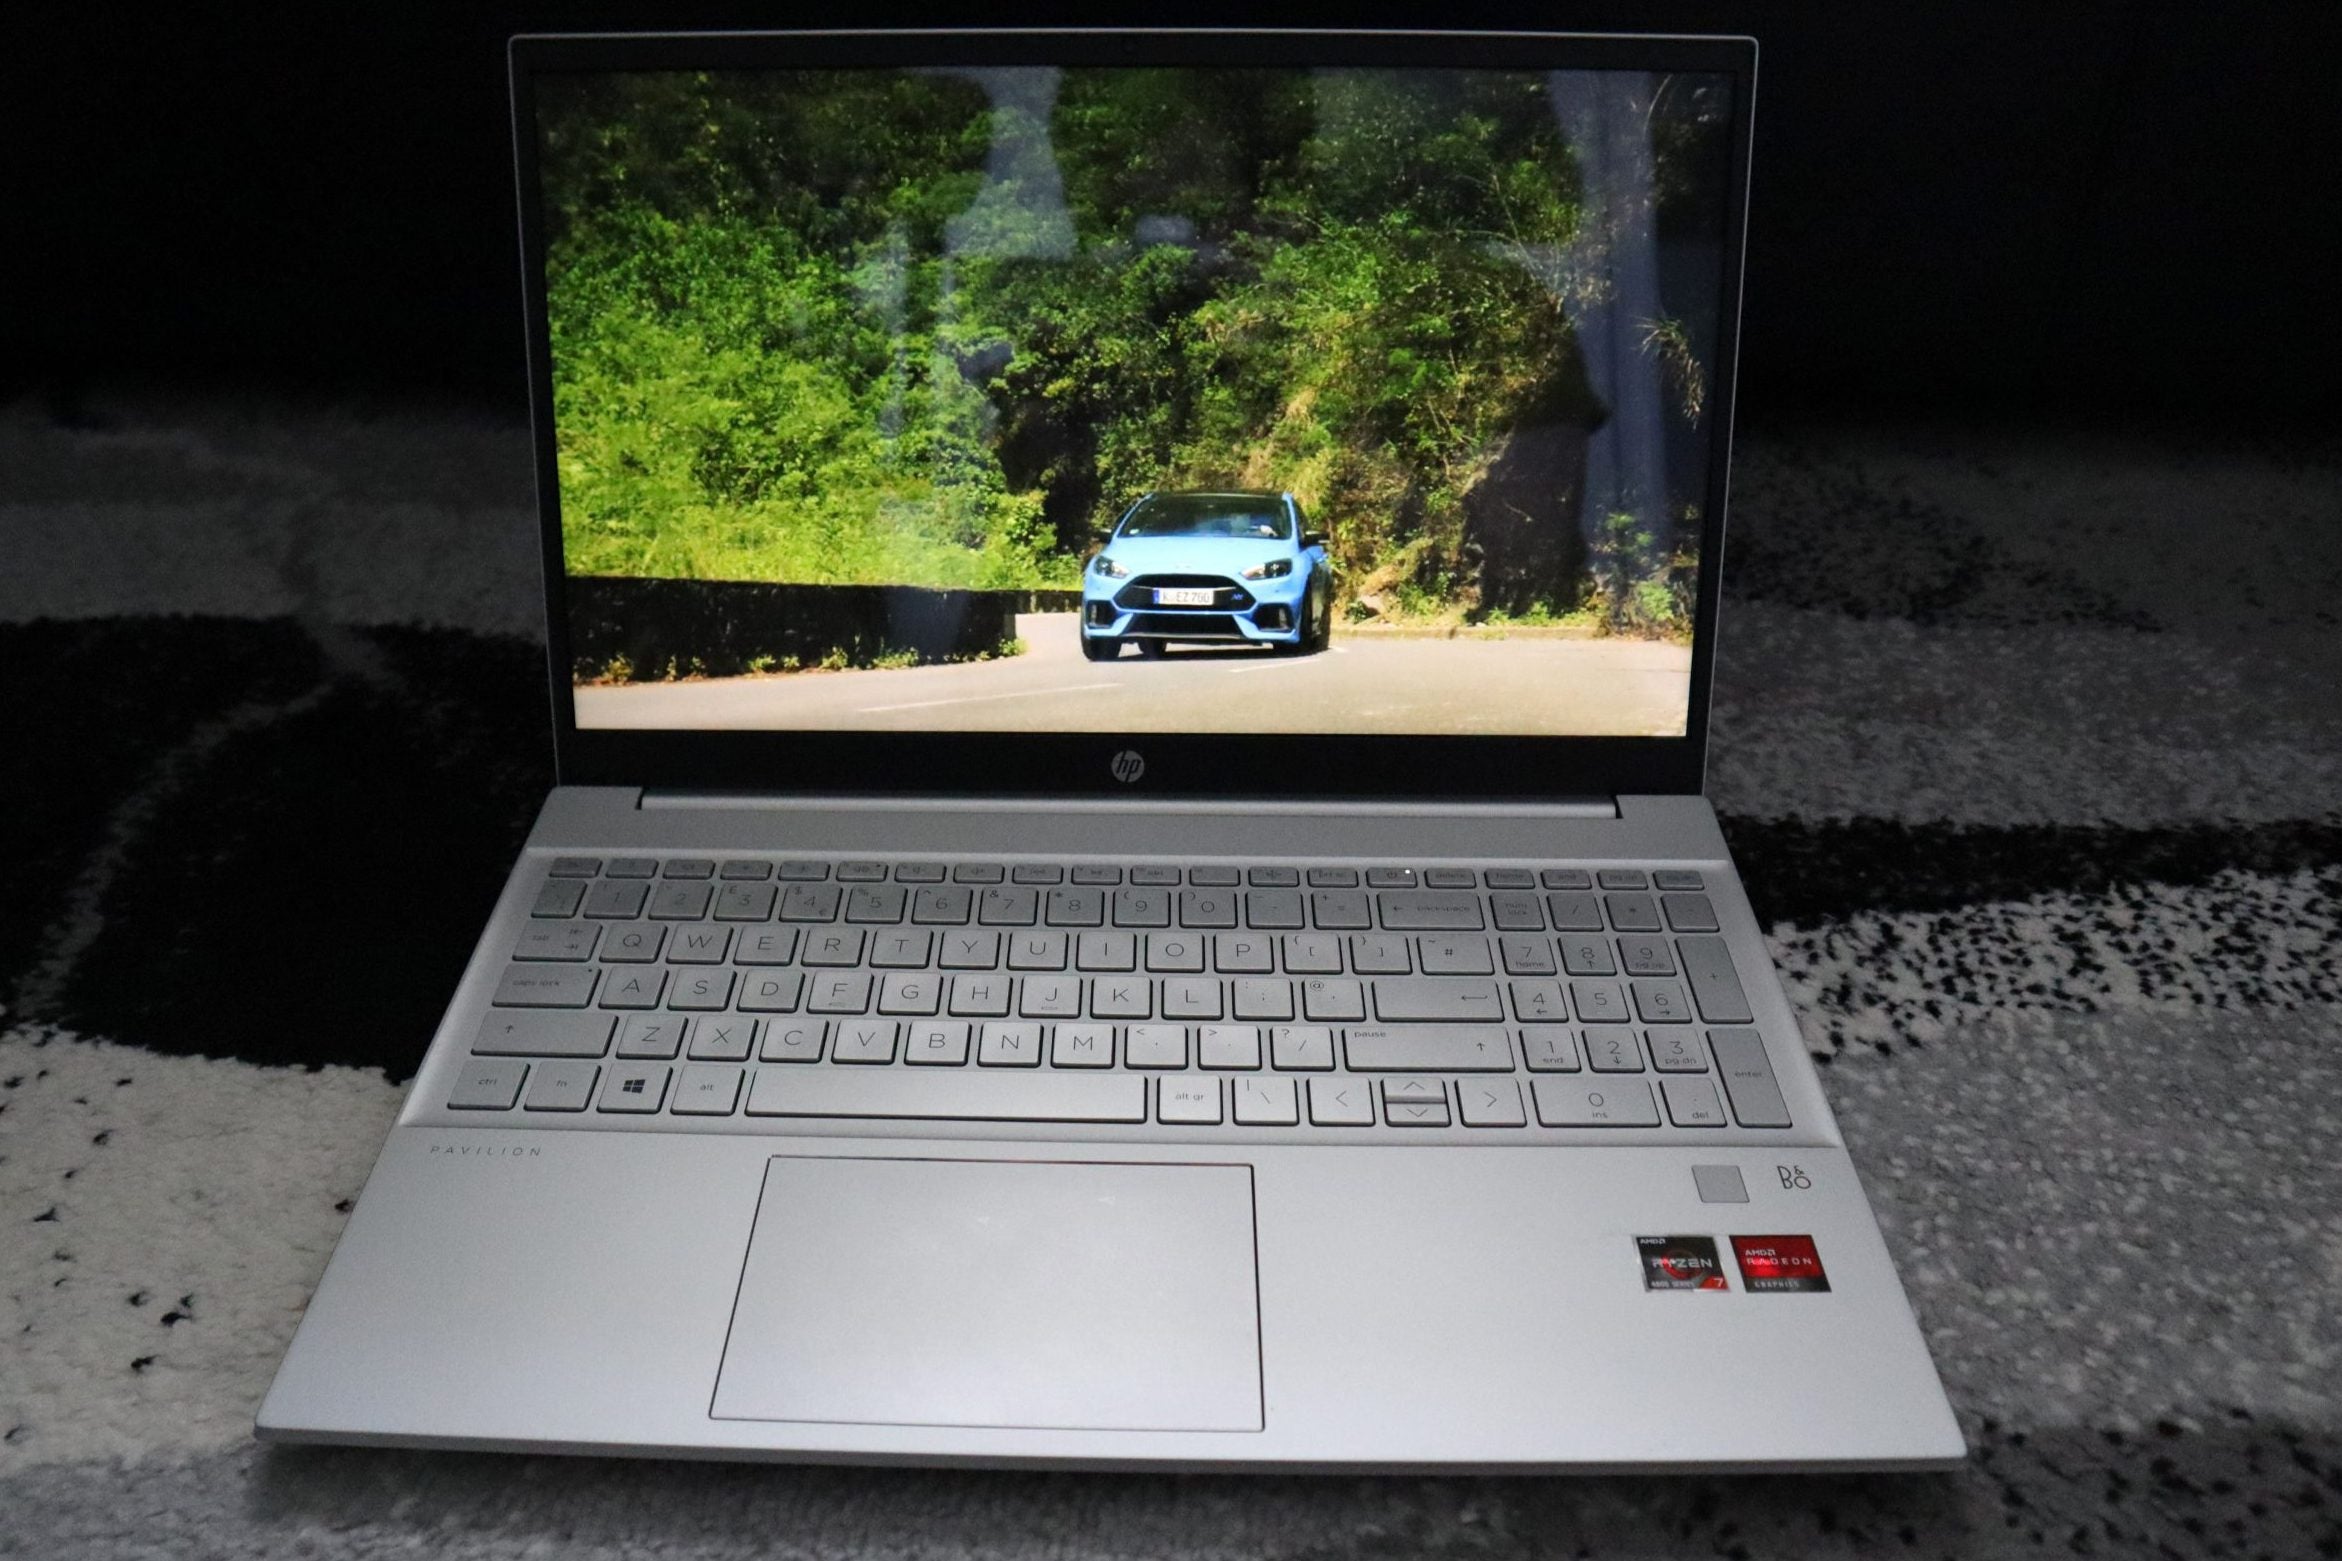 A black and silver HP Pavillion 15 laptop, displaying a car on road